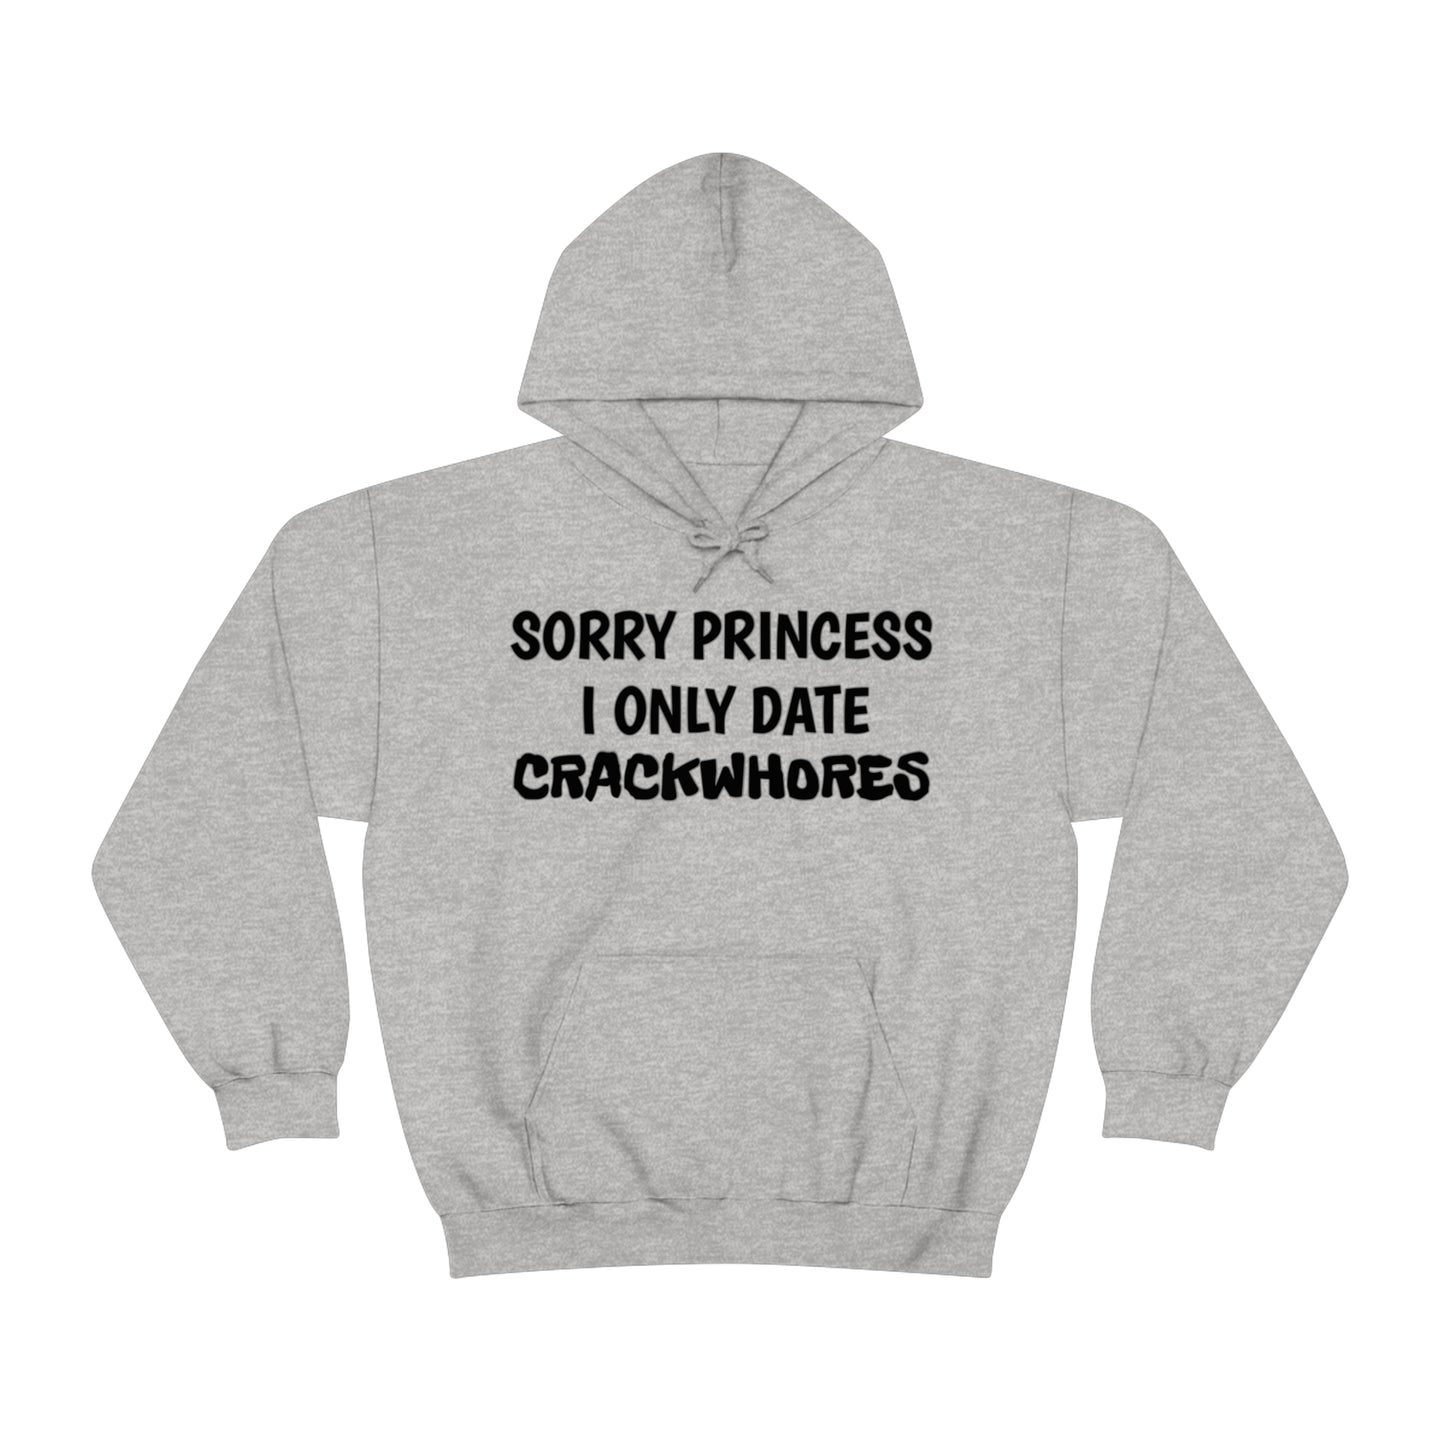 "Sorry Princess I Only Date Crackwhores" Hoodie